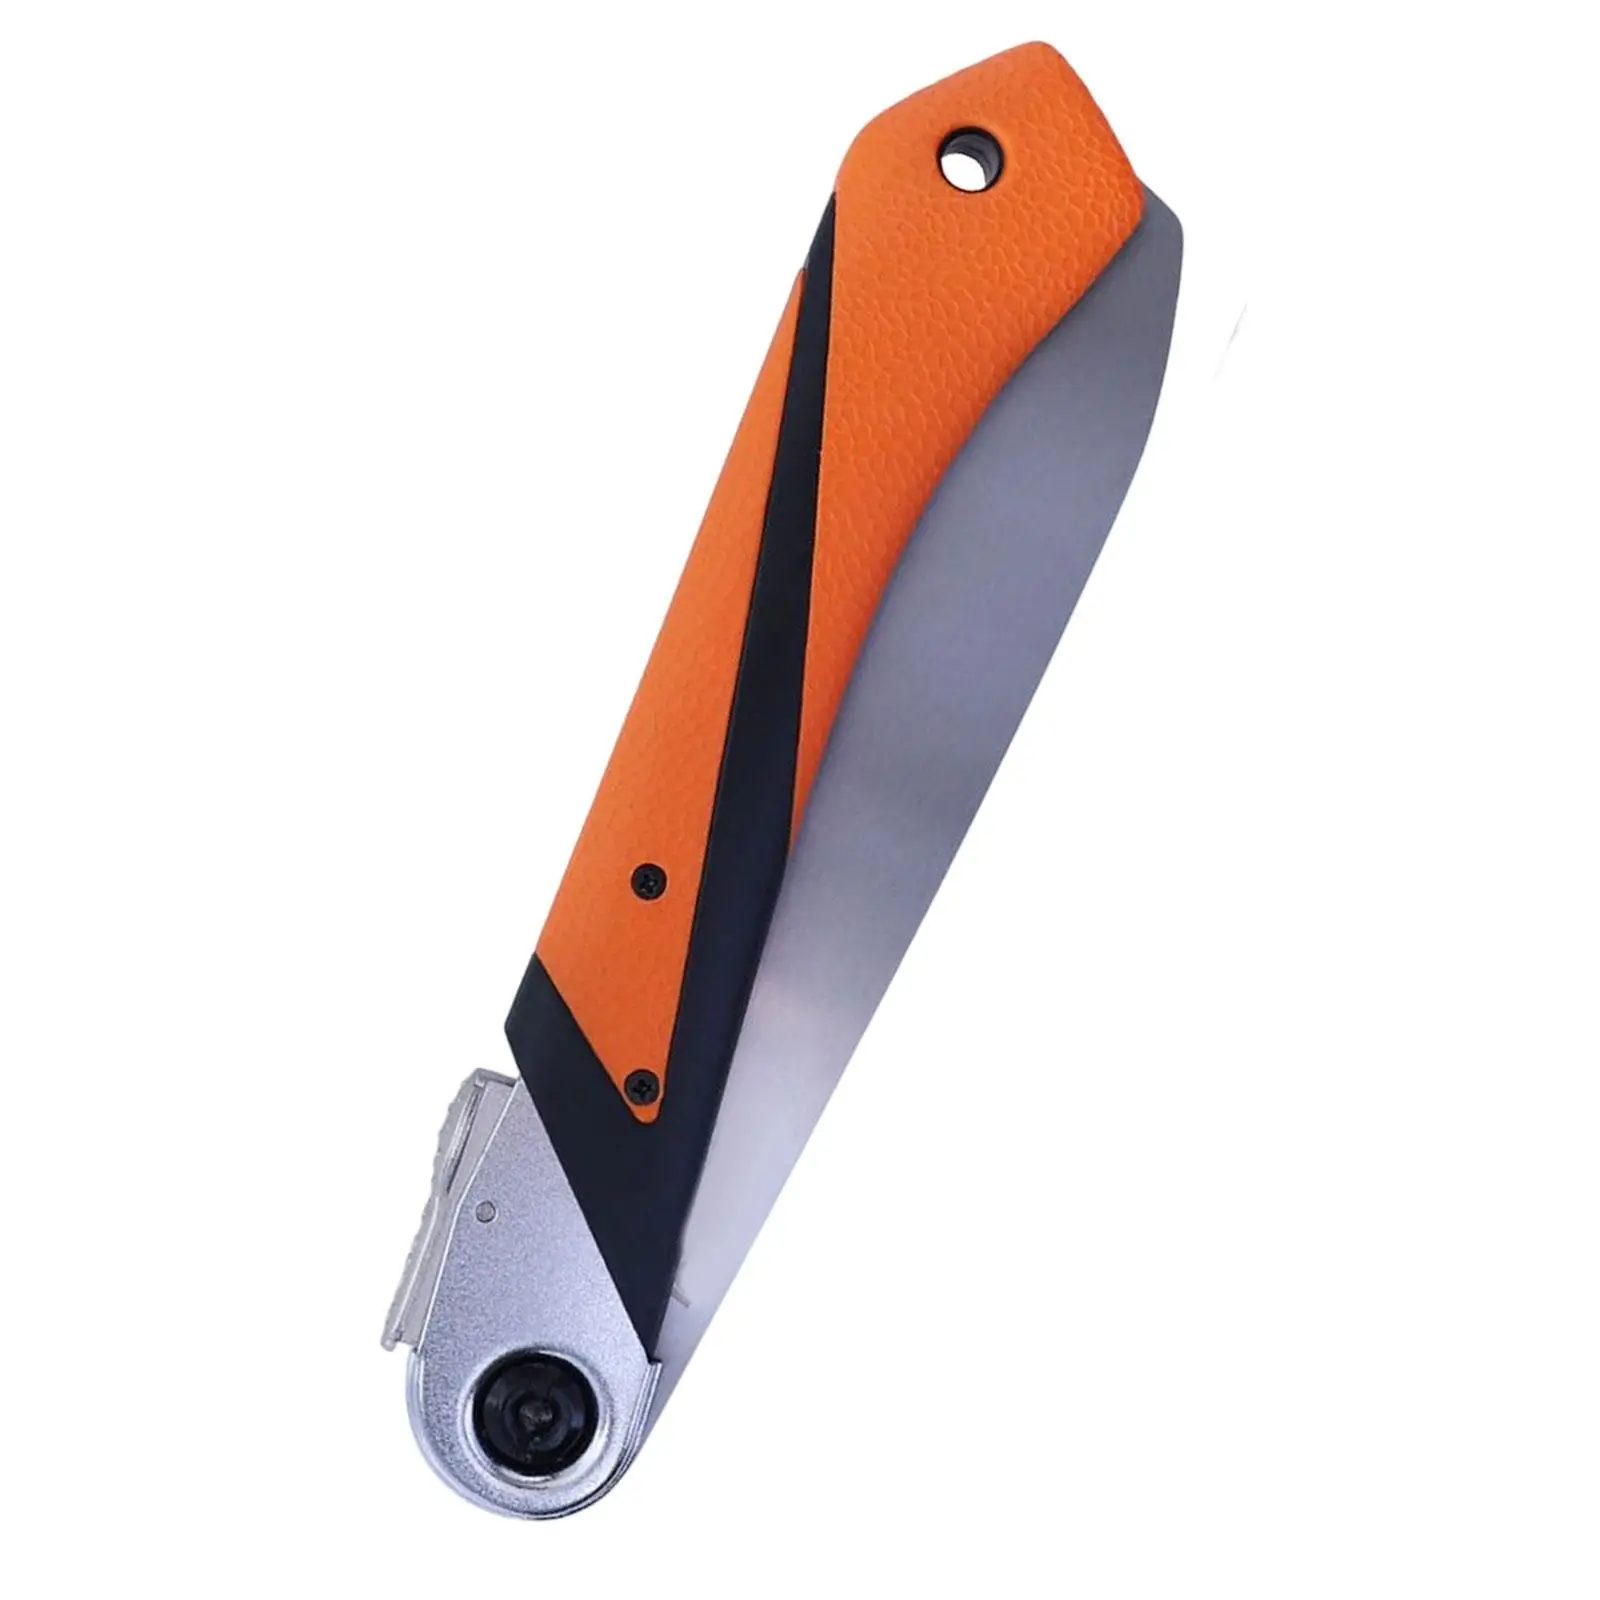 Portable Folding Saw Efficient Sawing Cutting Woodworking Tool Sturdy Trimming Hand Saw for Hunting Household Hiking